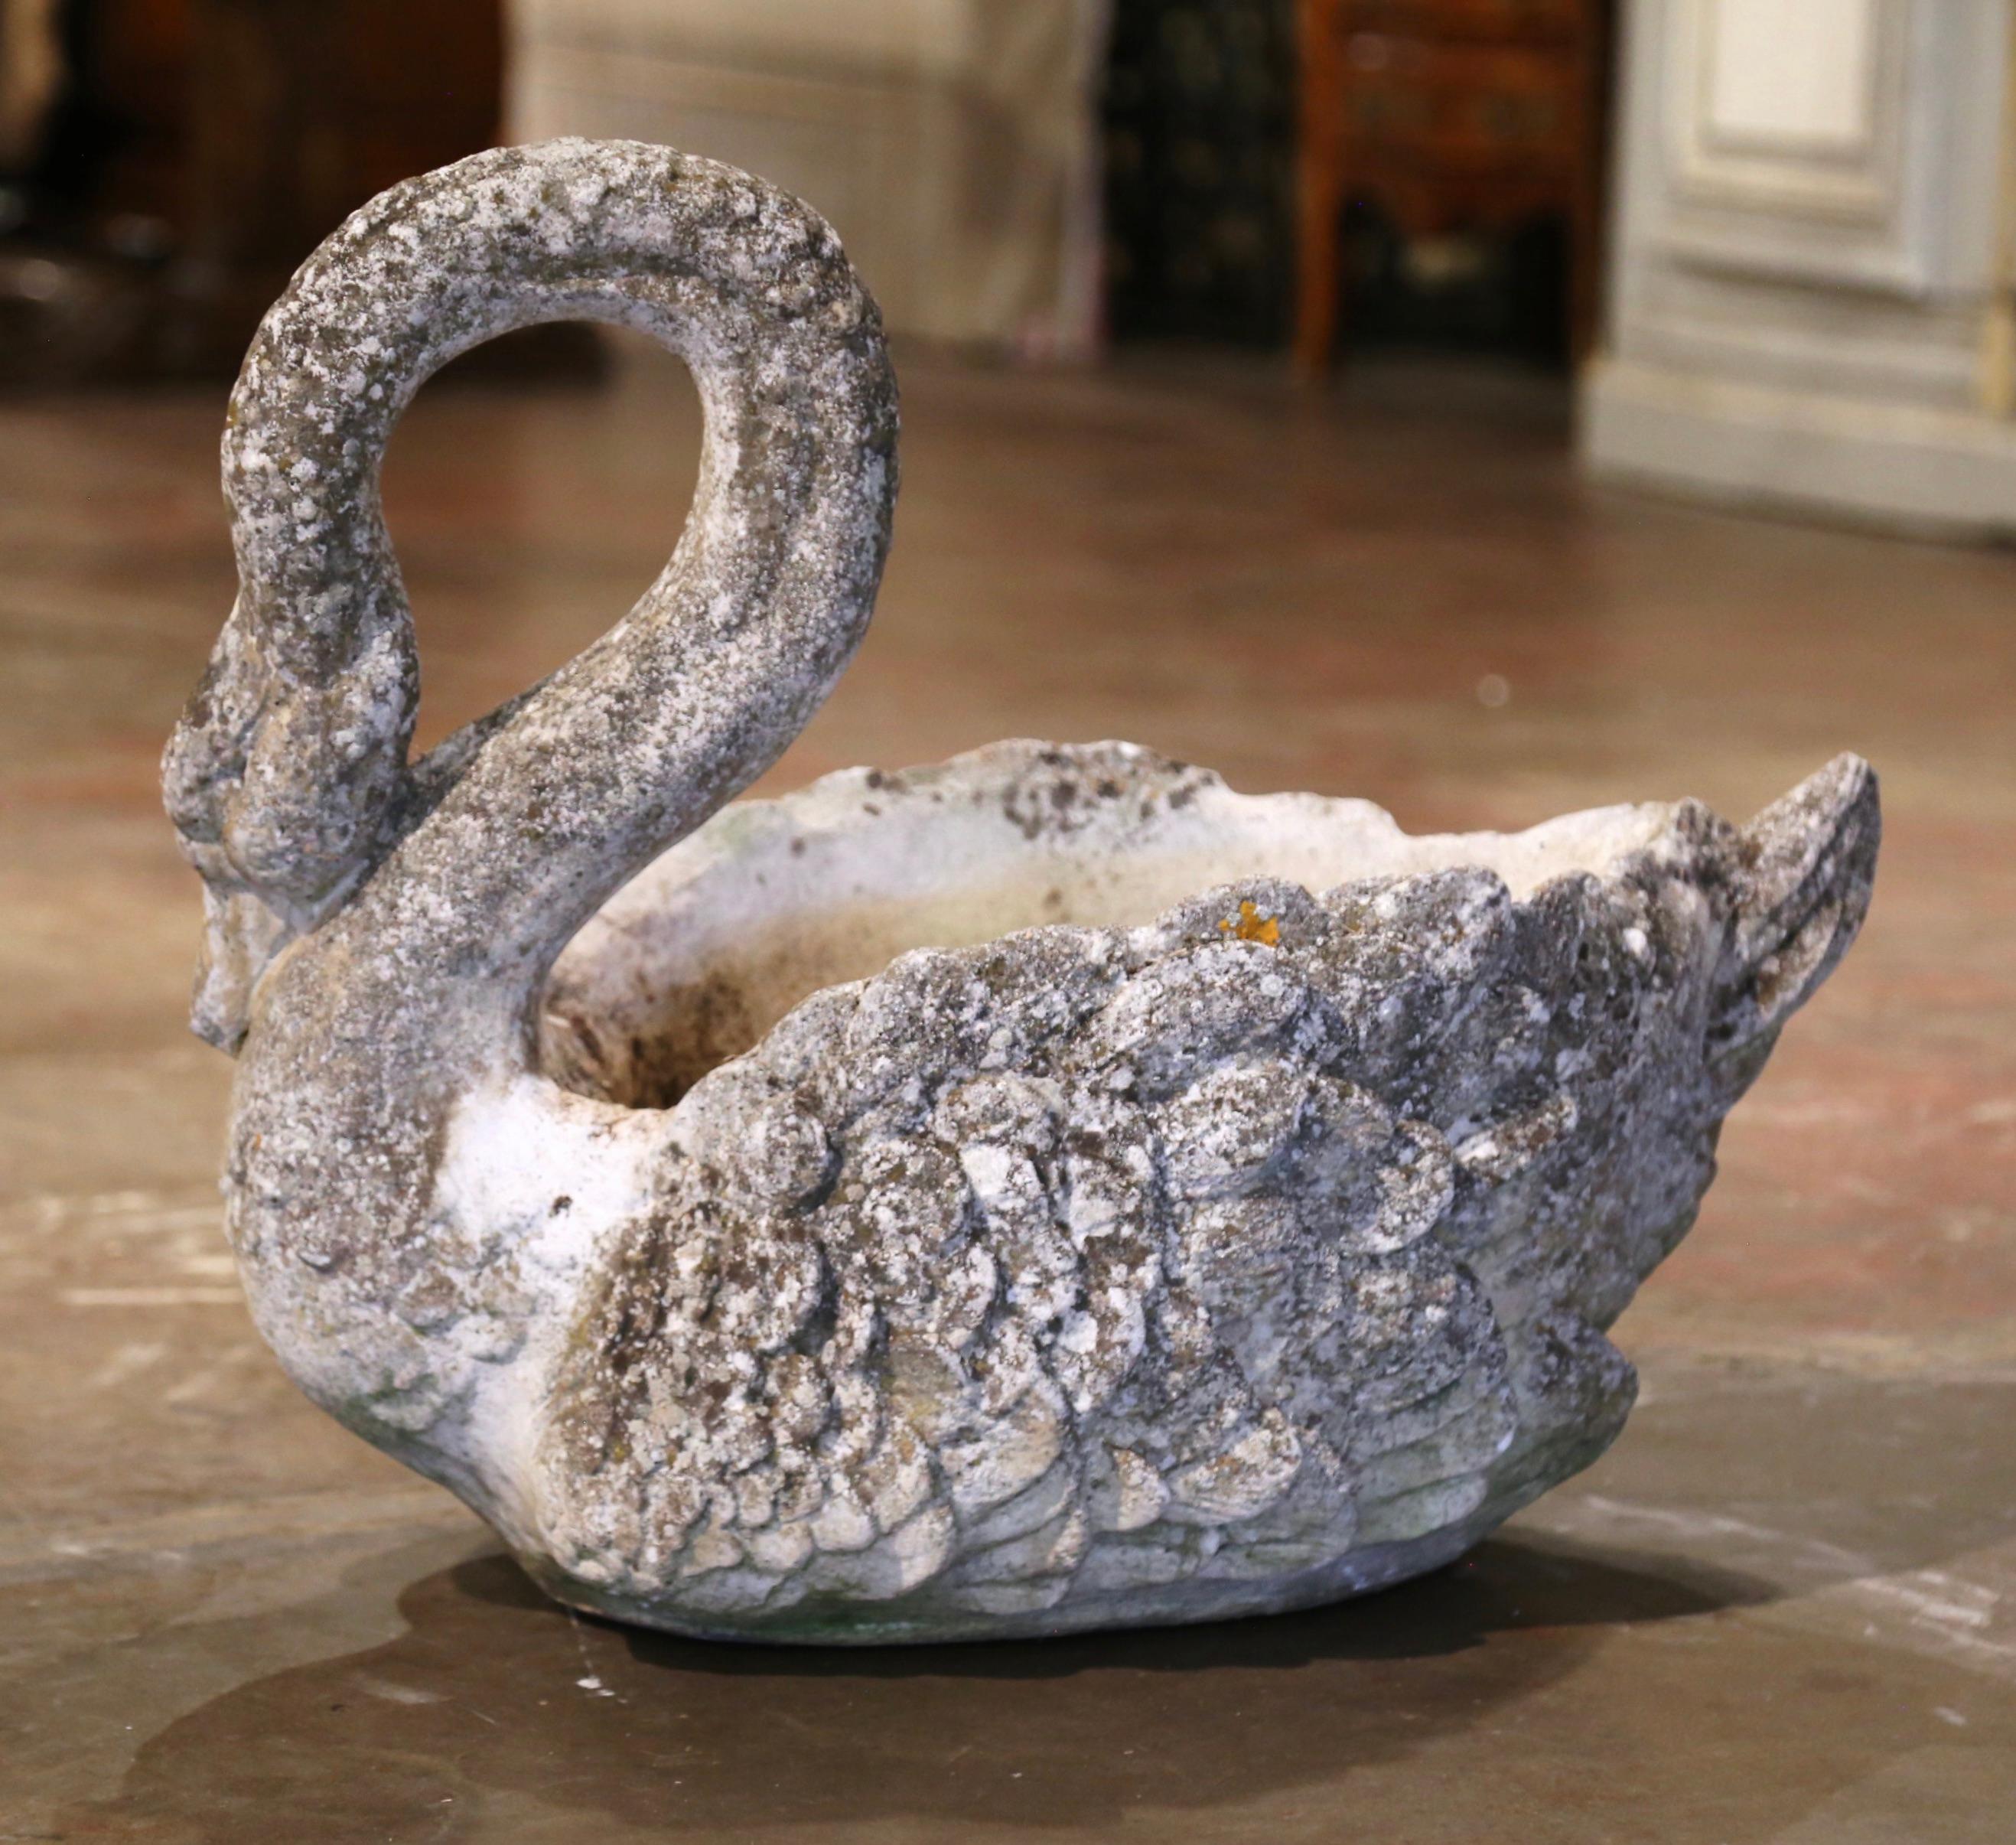 Decorate a patio or backyard with this antique stone Swan planter. Crafted in France circa 1920 and carved of concrete, the sculpture features a regal swan-form dressed with a large flower holder. The bird plant pot contains a hole for drainage. The